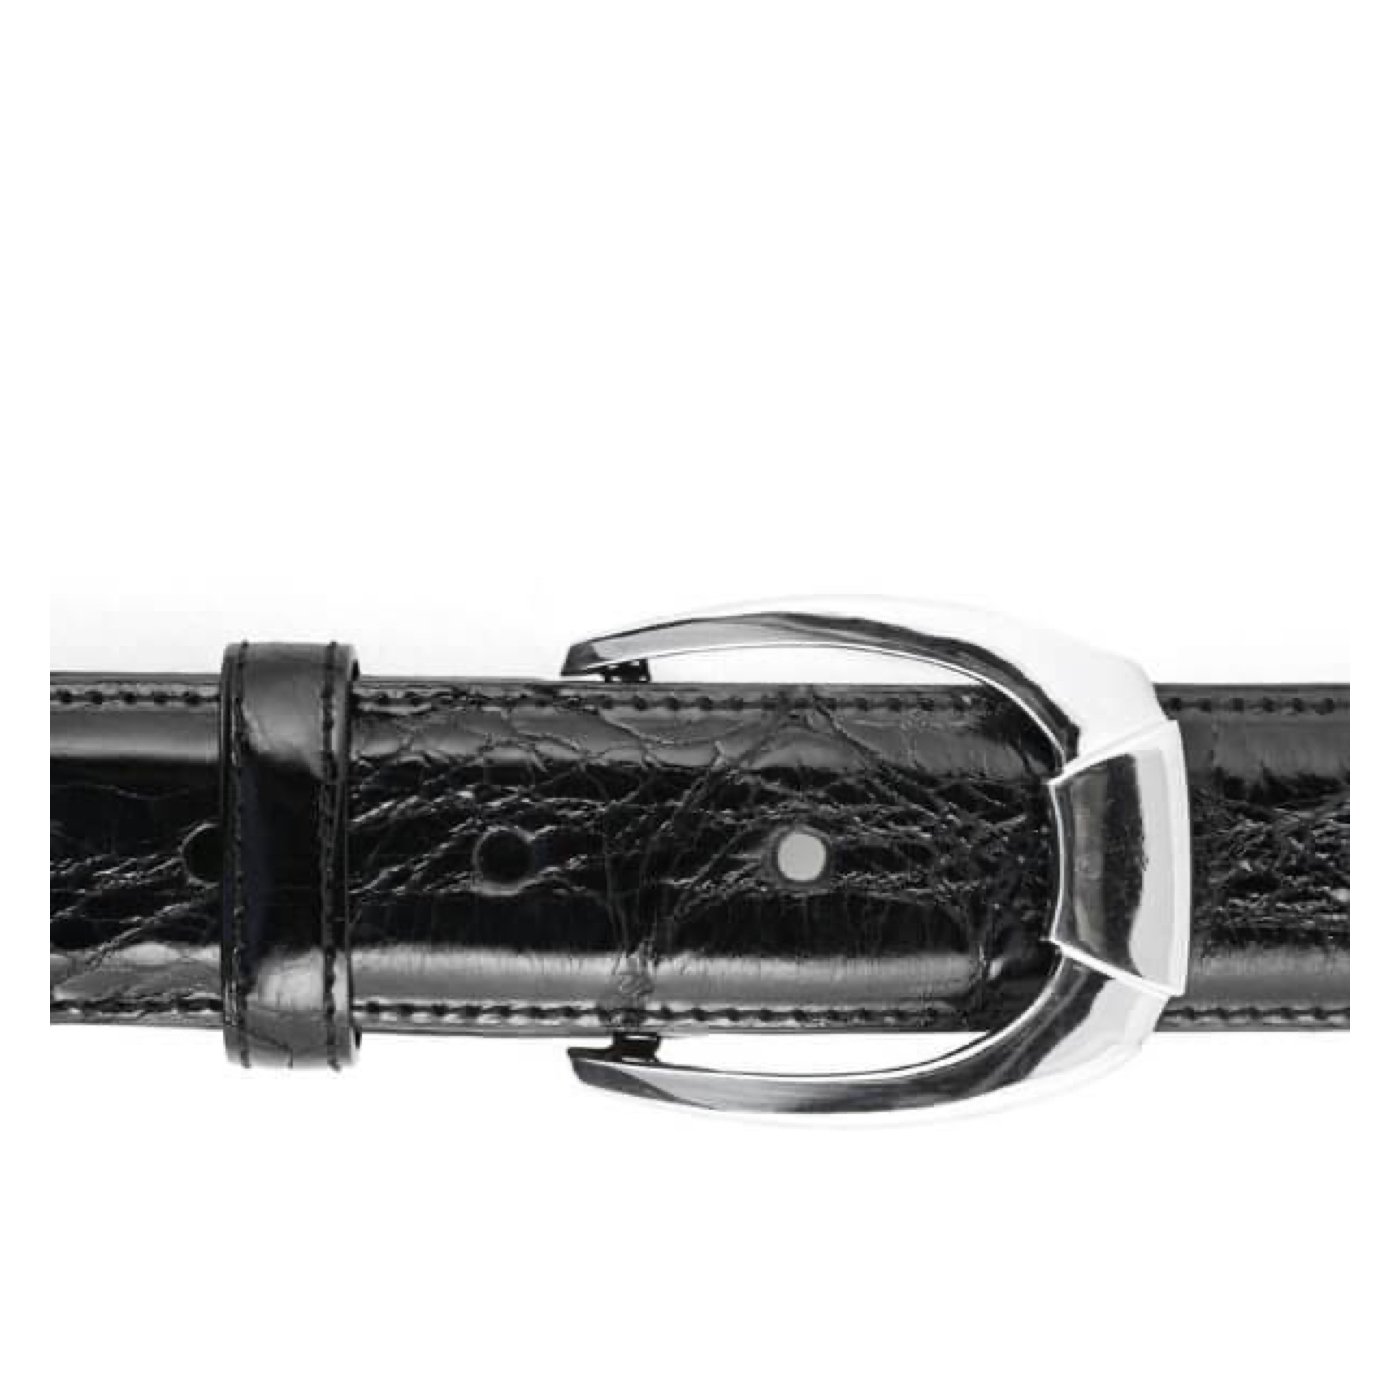 Andreas silver belt buckle Zadeh NY Sterling silver belt buckle on a black strap. Our straps, made in Italy, are detachable and available in black, dark brown, or cognac. 